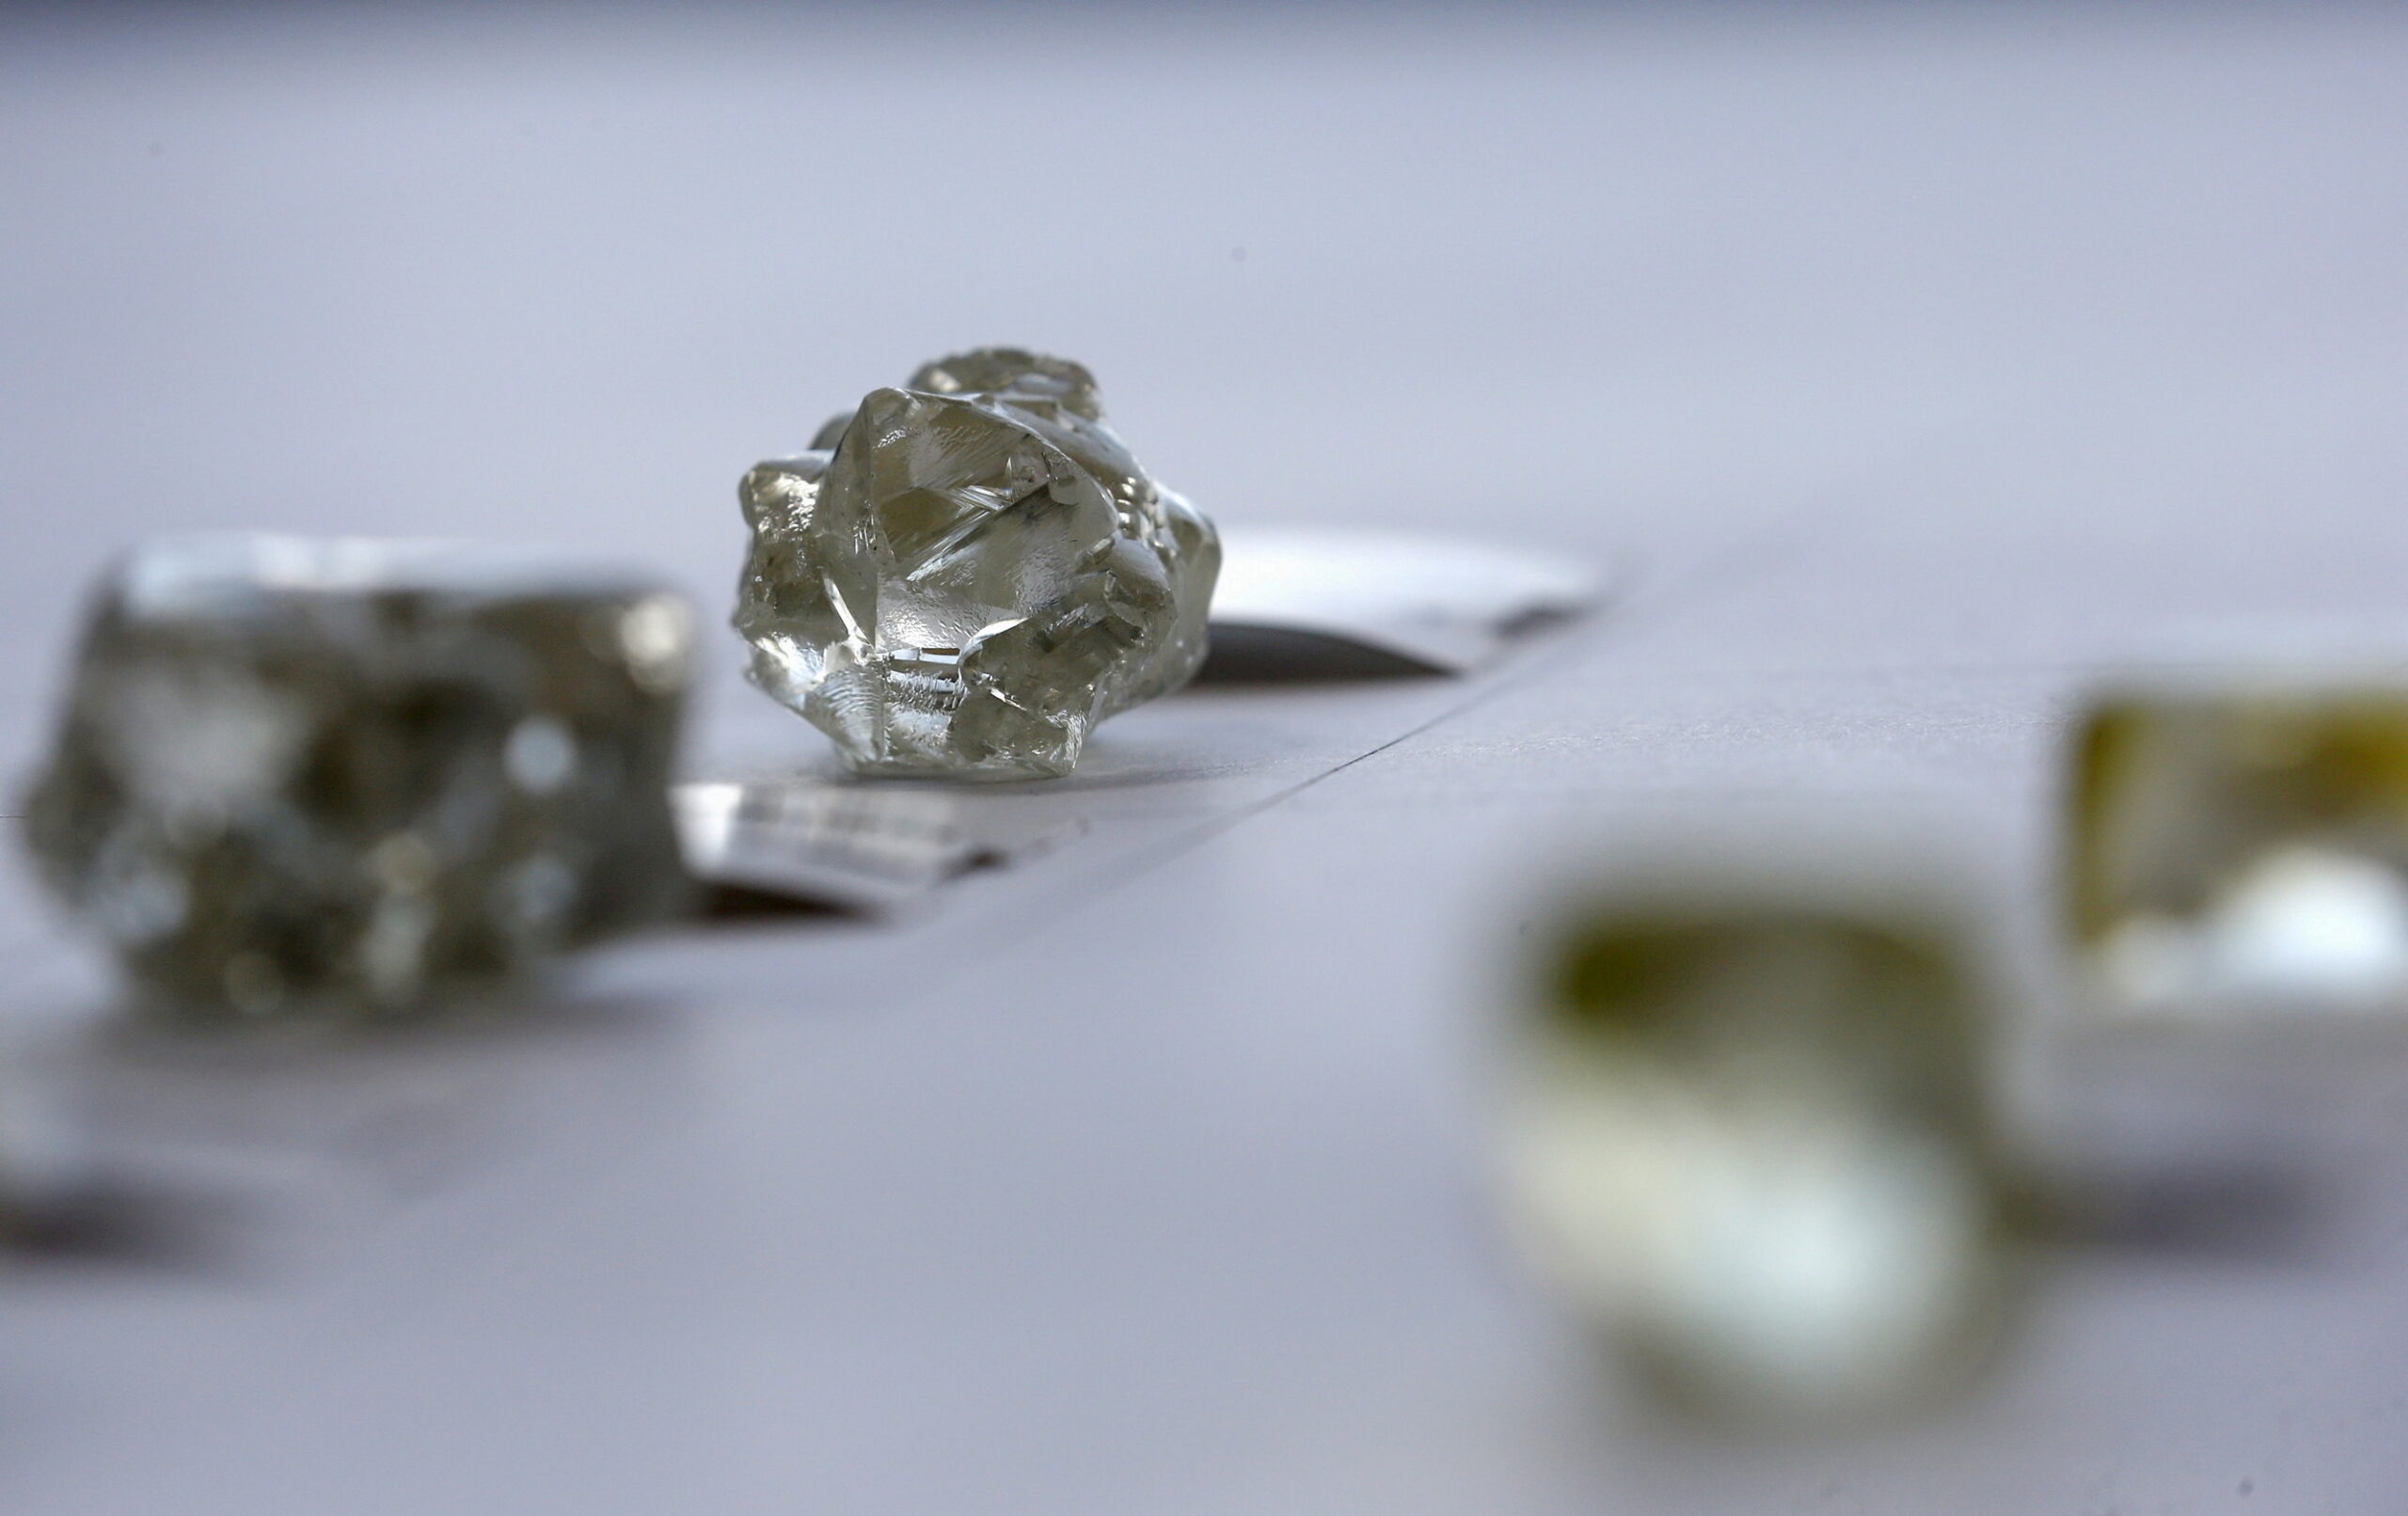 Diamonds are displayed at the De Beers Global Sightholder Sales (GSS) in Gaborone